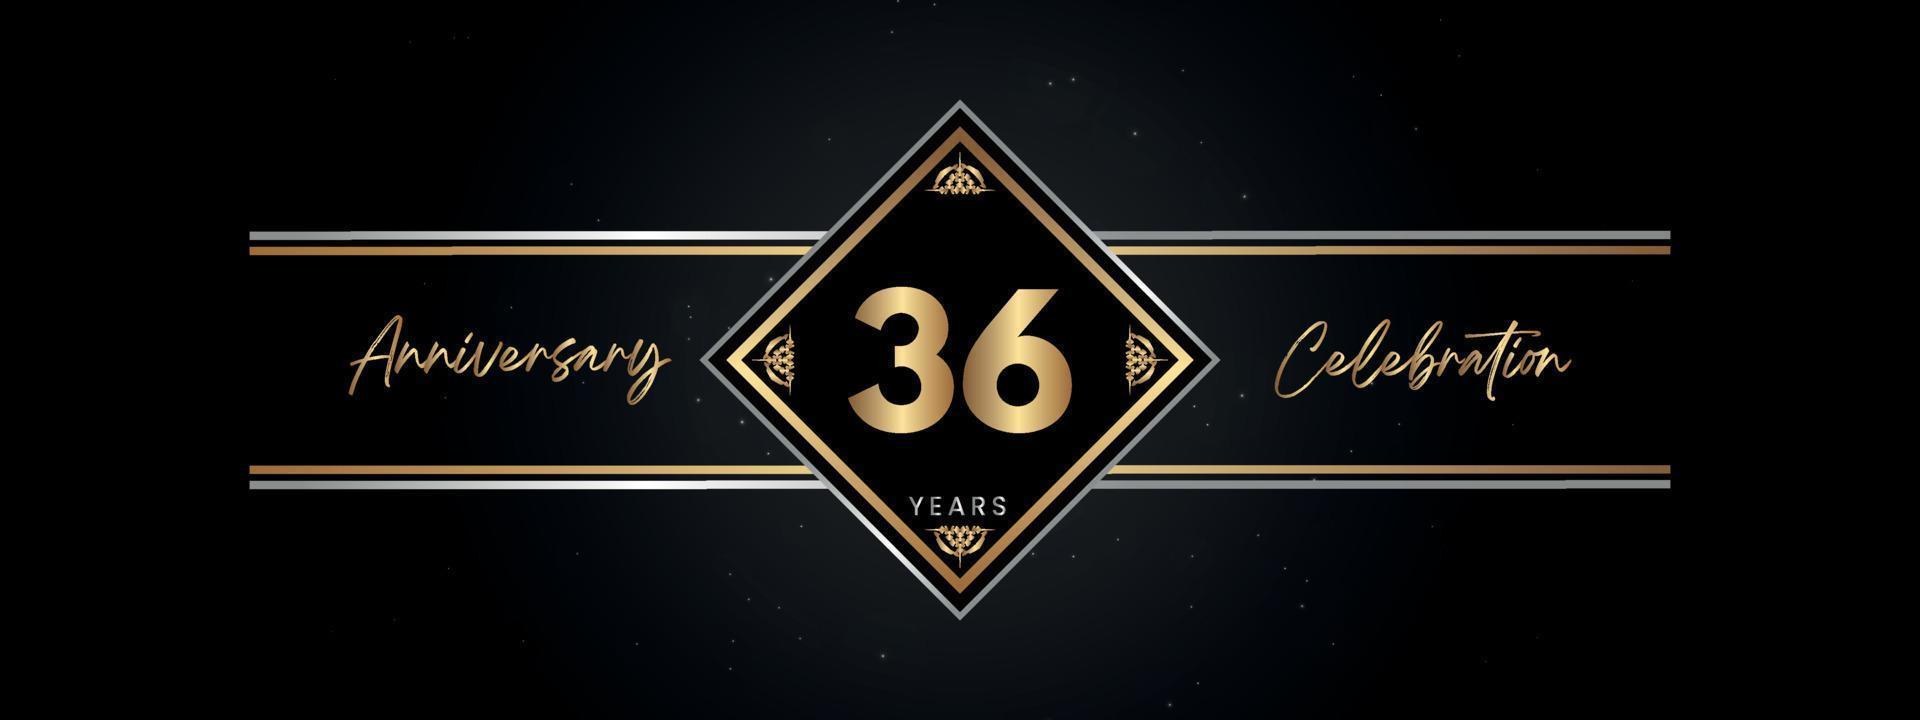 36 years anniversary golden color with decorative frame isolated on black background for anniversary celebration event, birthday party, brochure, greeting card. 36 Year Anniversary Template Design vector